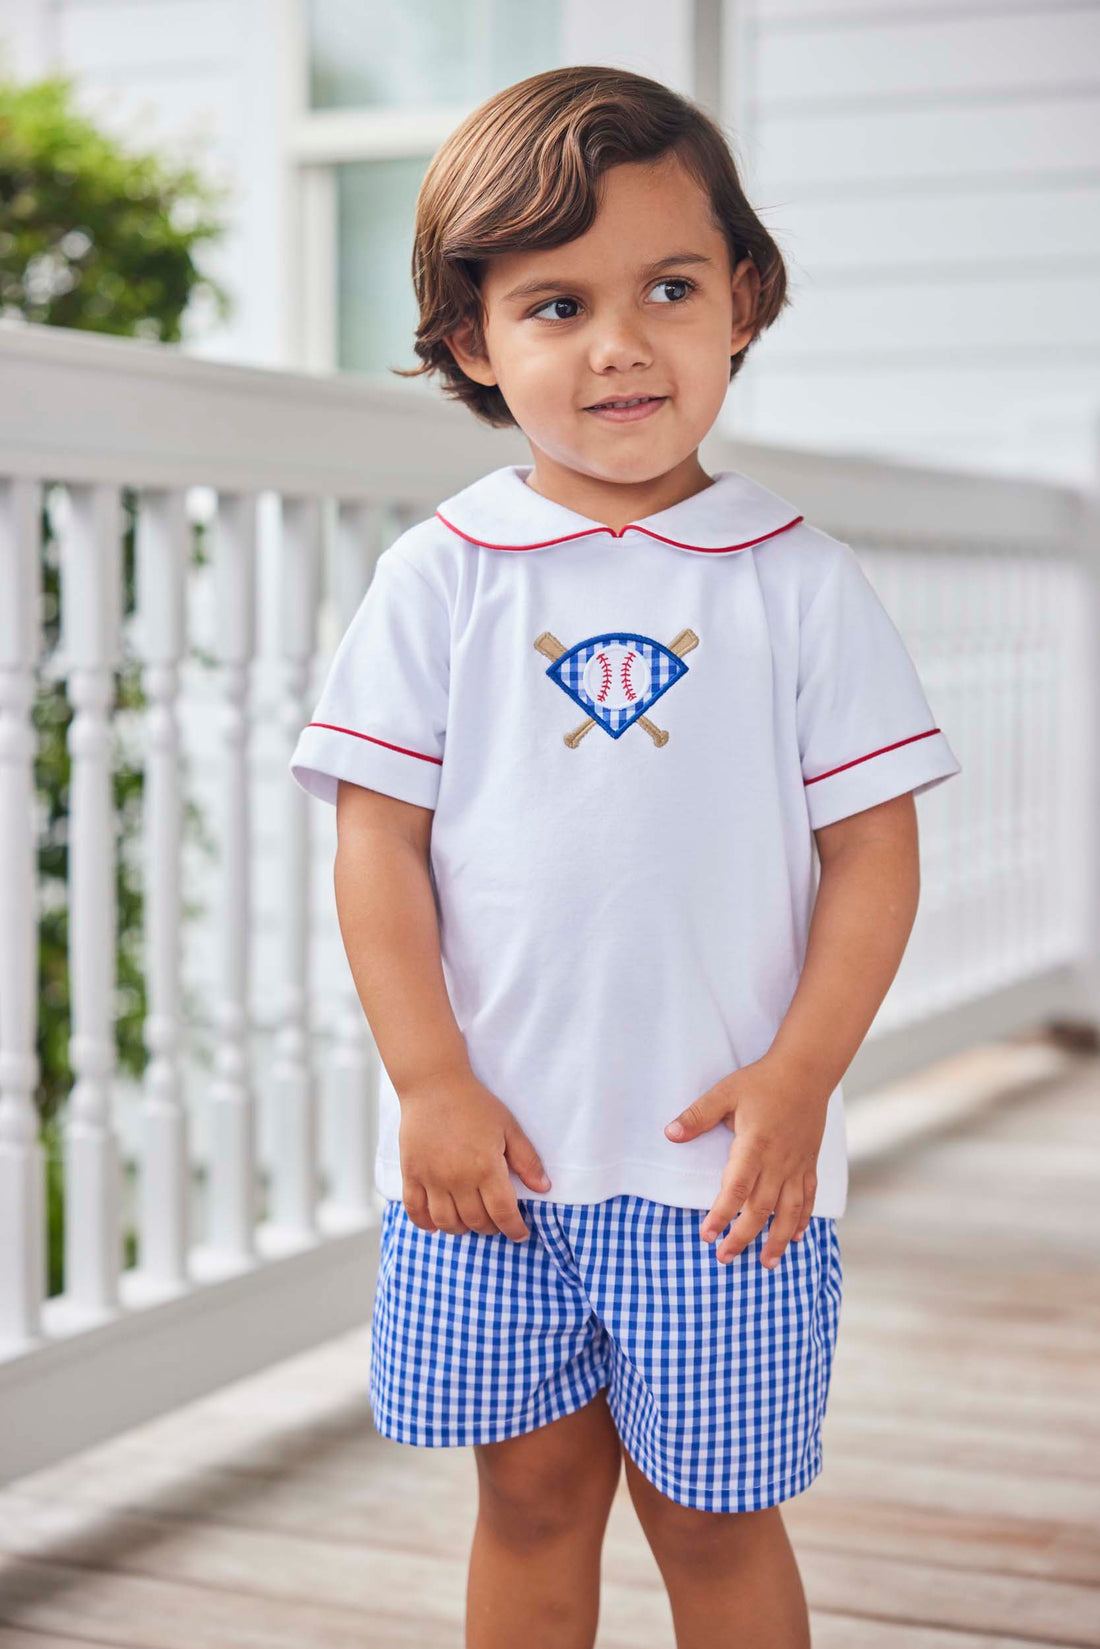 classic childrens clothing boy peter pan short set with blue gingham shorts and piped peter pan shirt with baseball applique